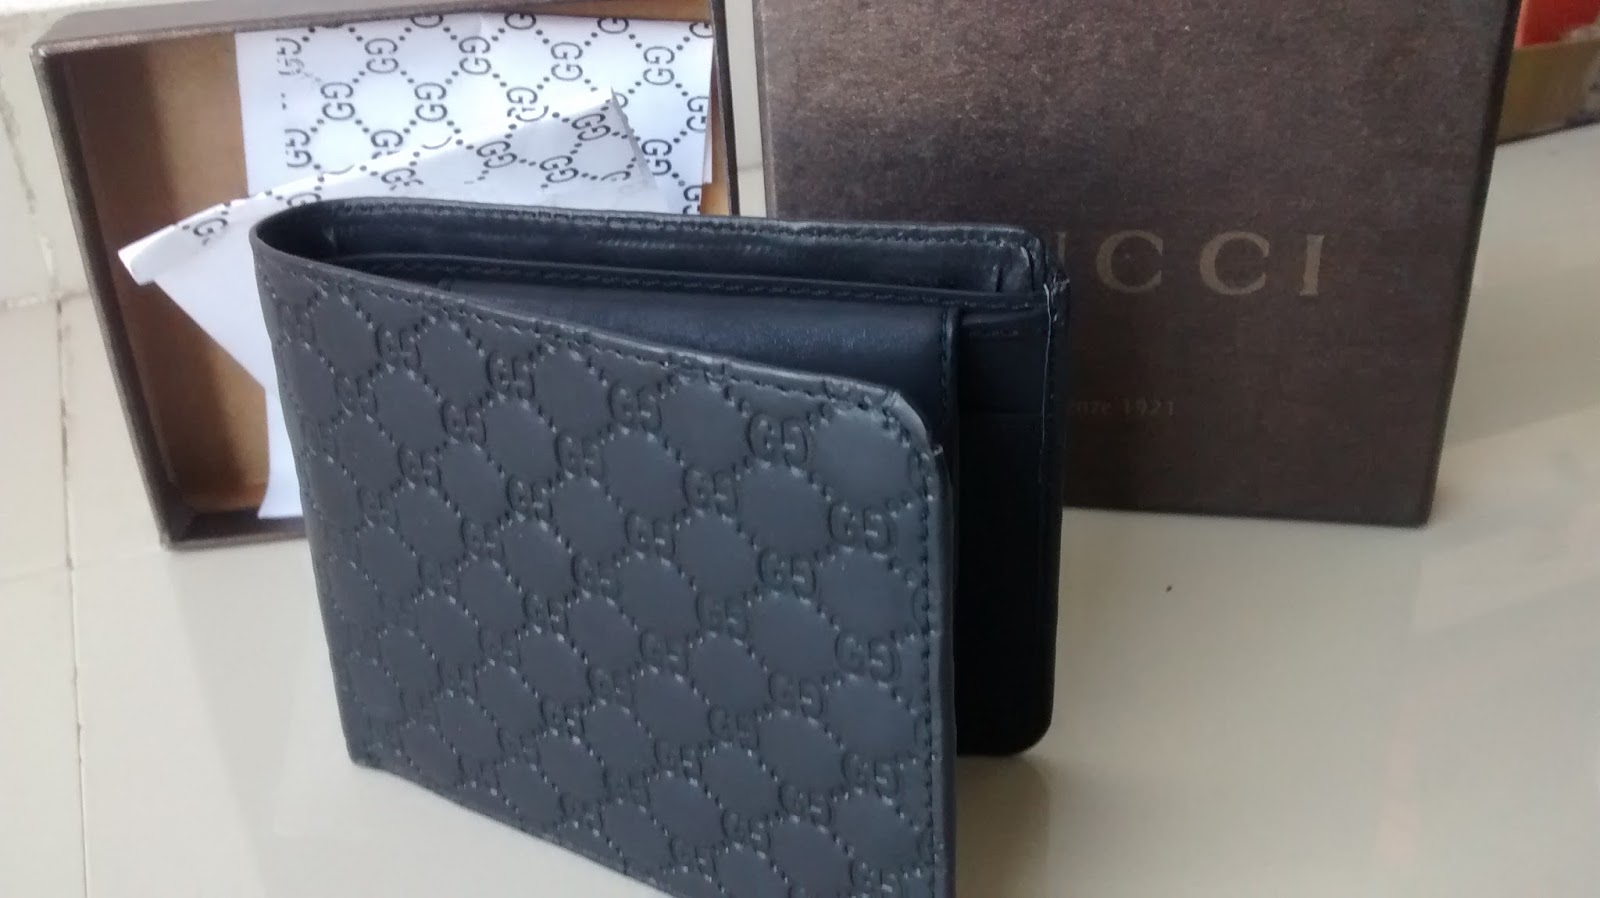 gucci leather wallet price